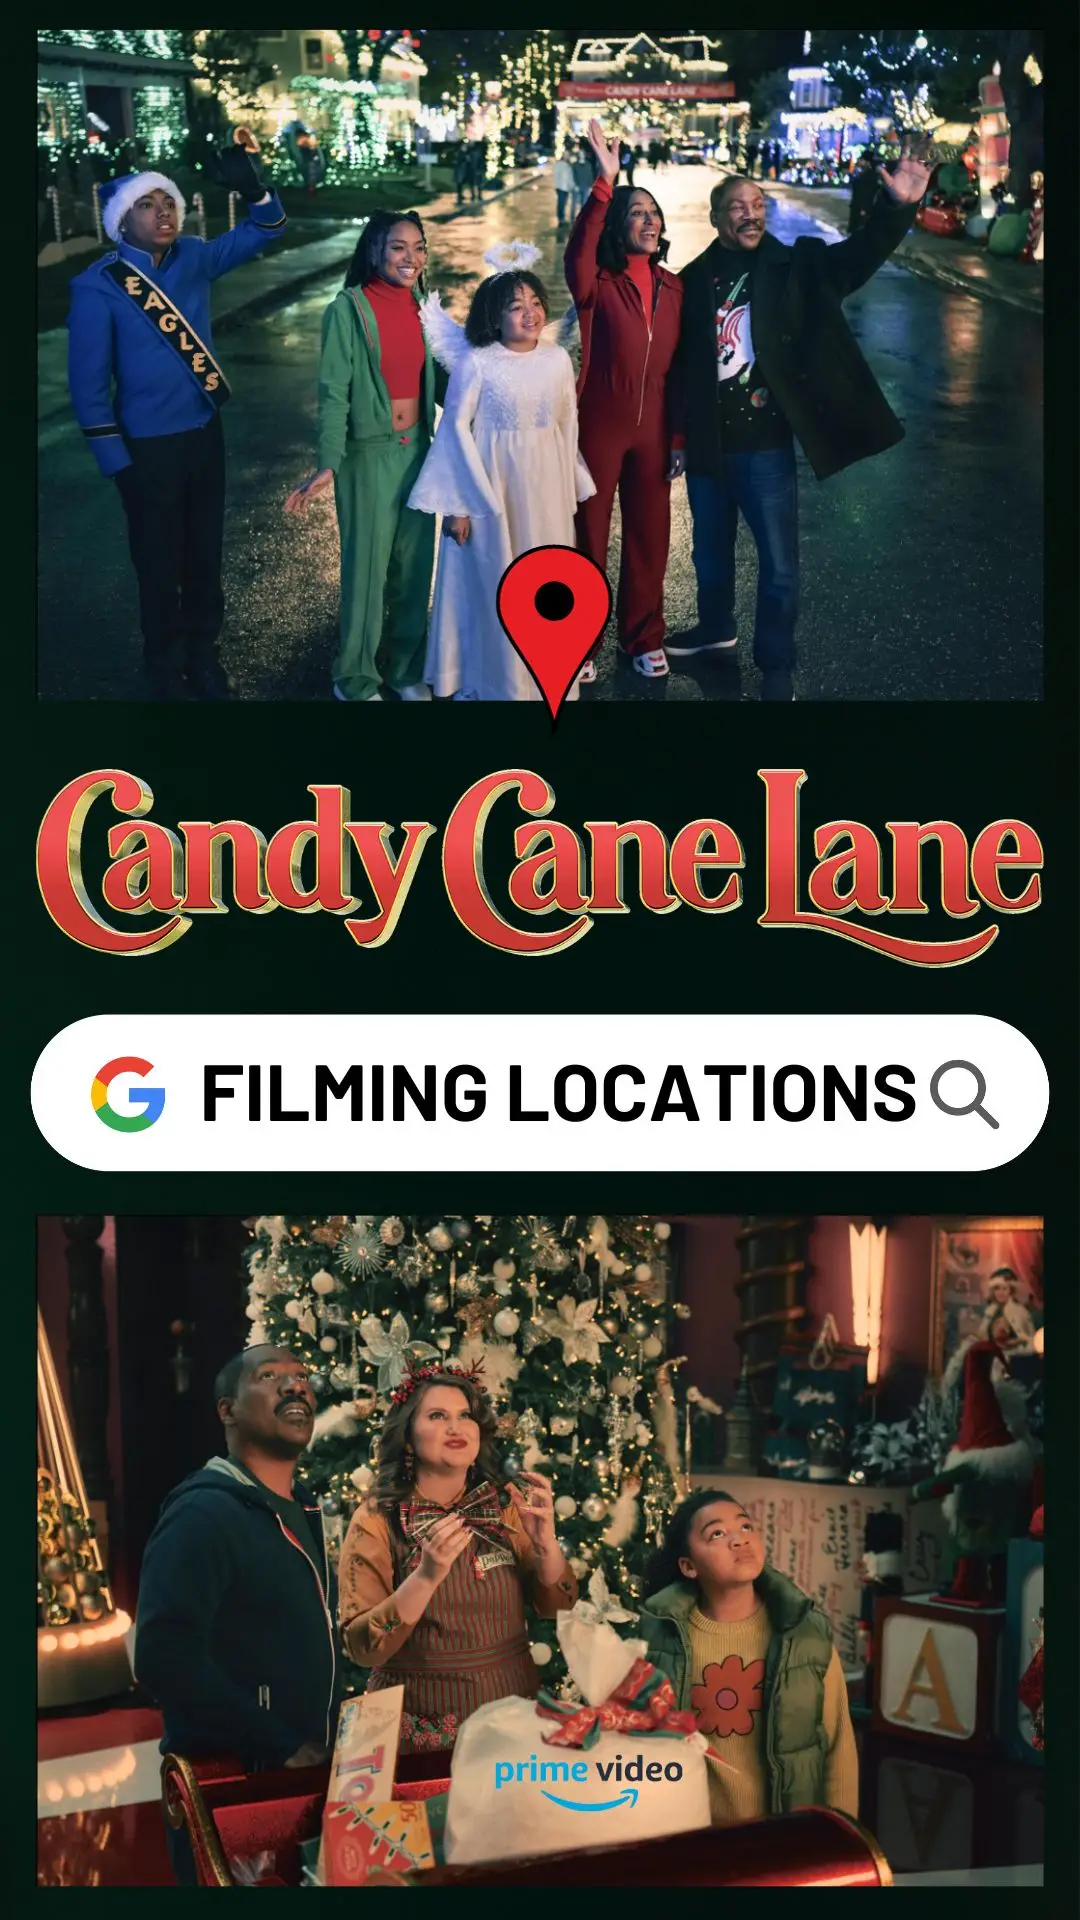 Candy Cane Lane Filming Locations